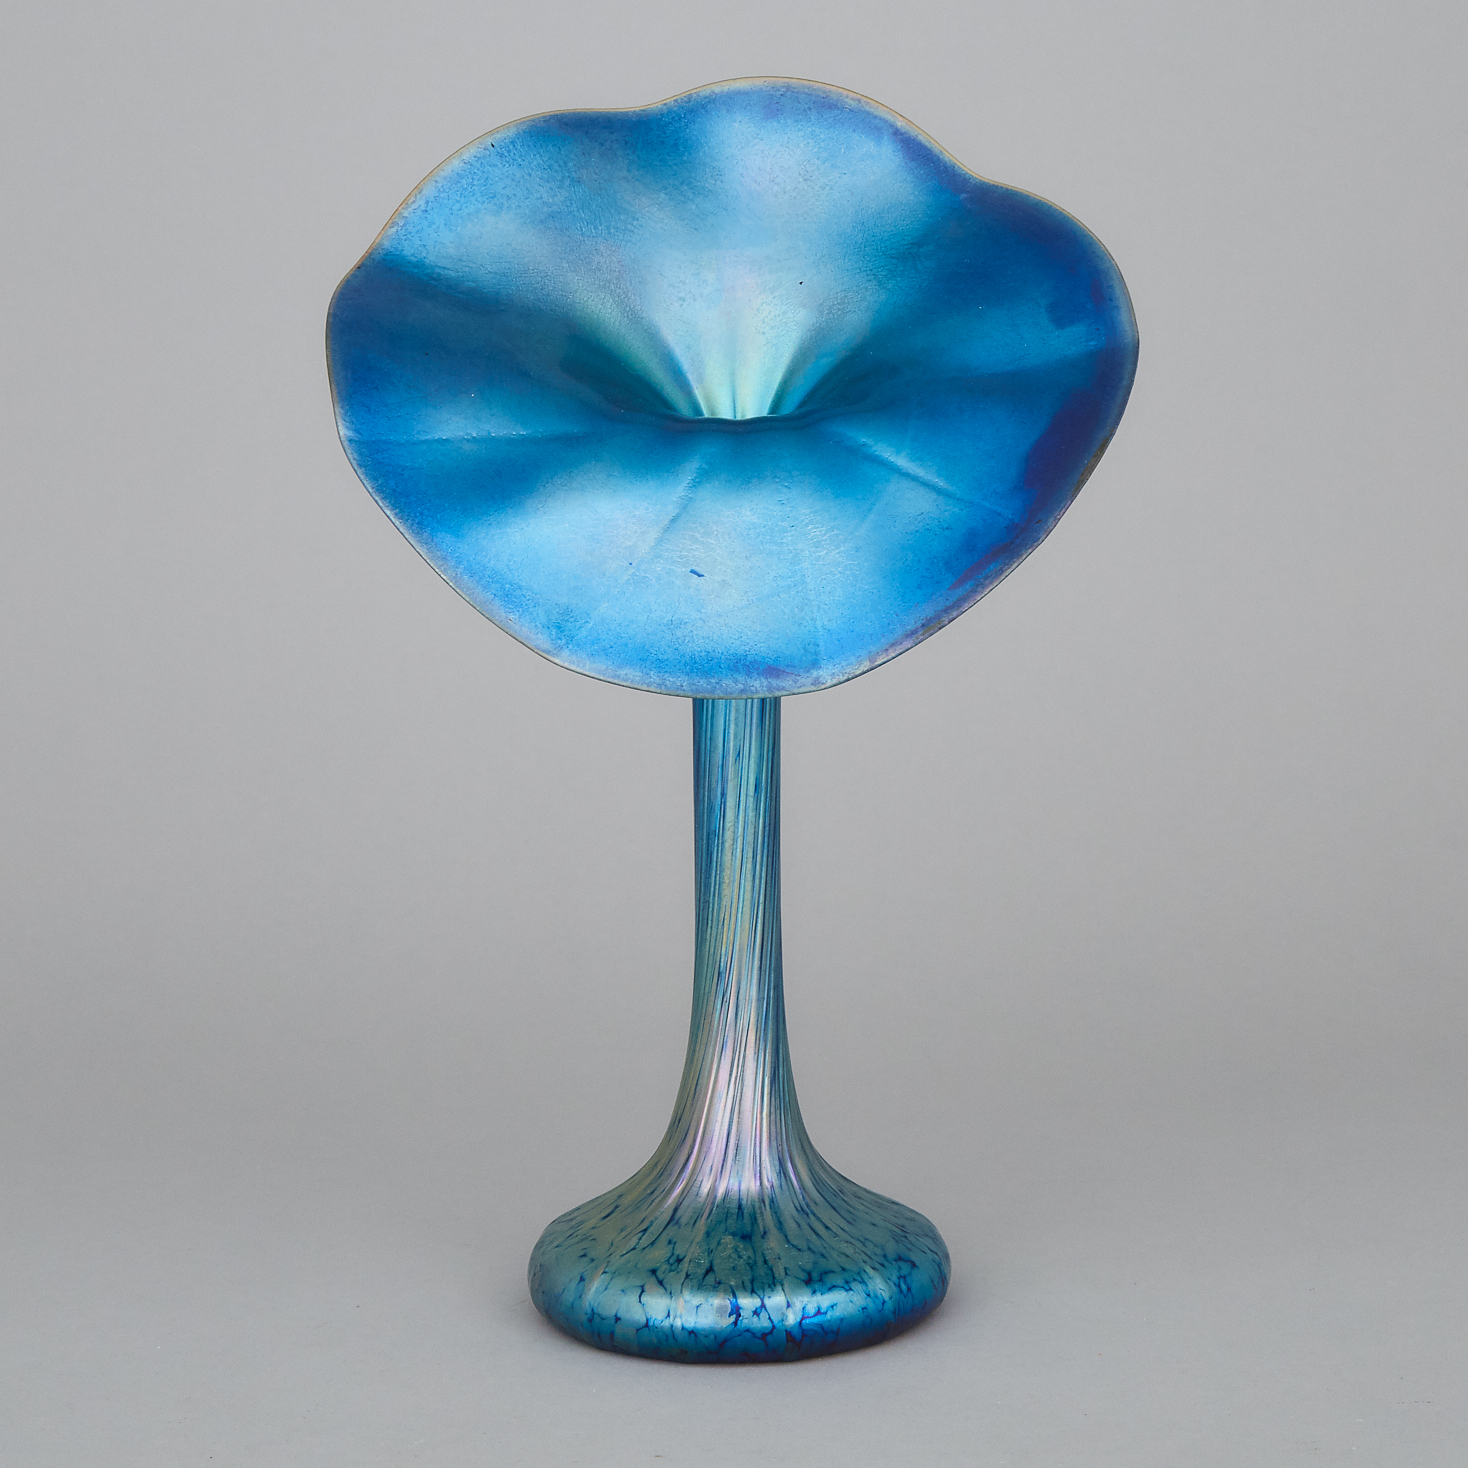 American Iridescent Blue Glass Jack-in-the-Pulpit Vase, 20th century